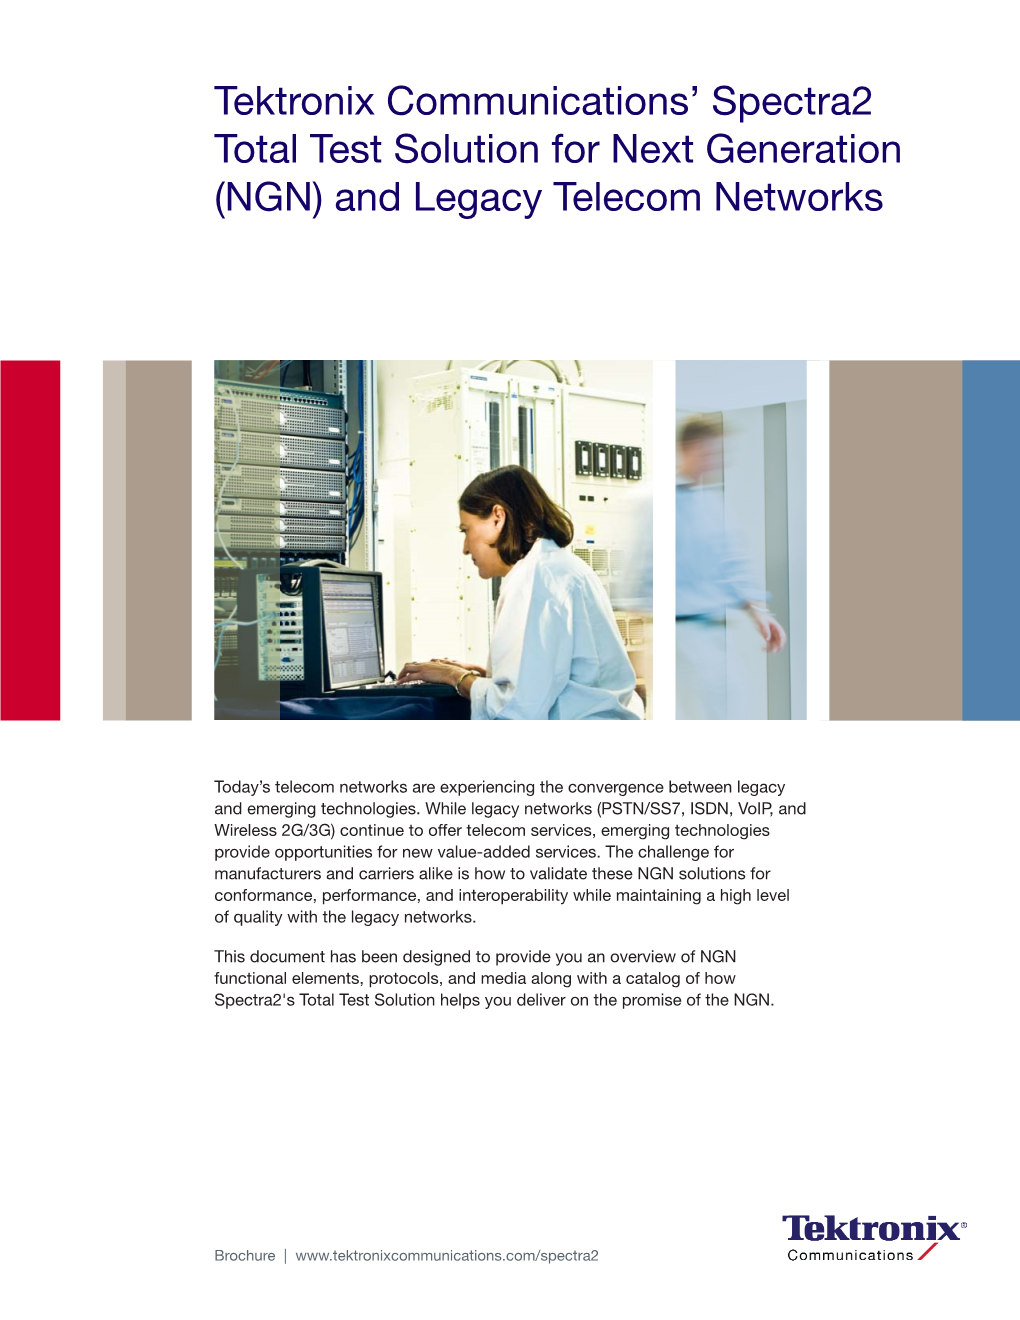 Tektronix Communications' Spectra2 Total Test Solution for Next Generation (NGN) and Legacy Telecom Networks